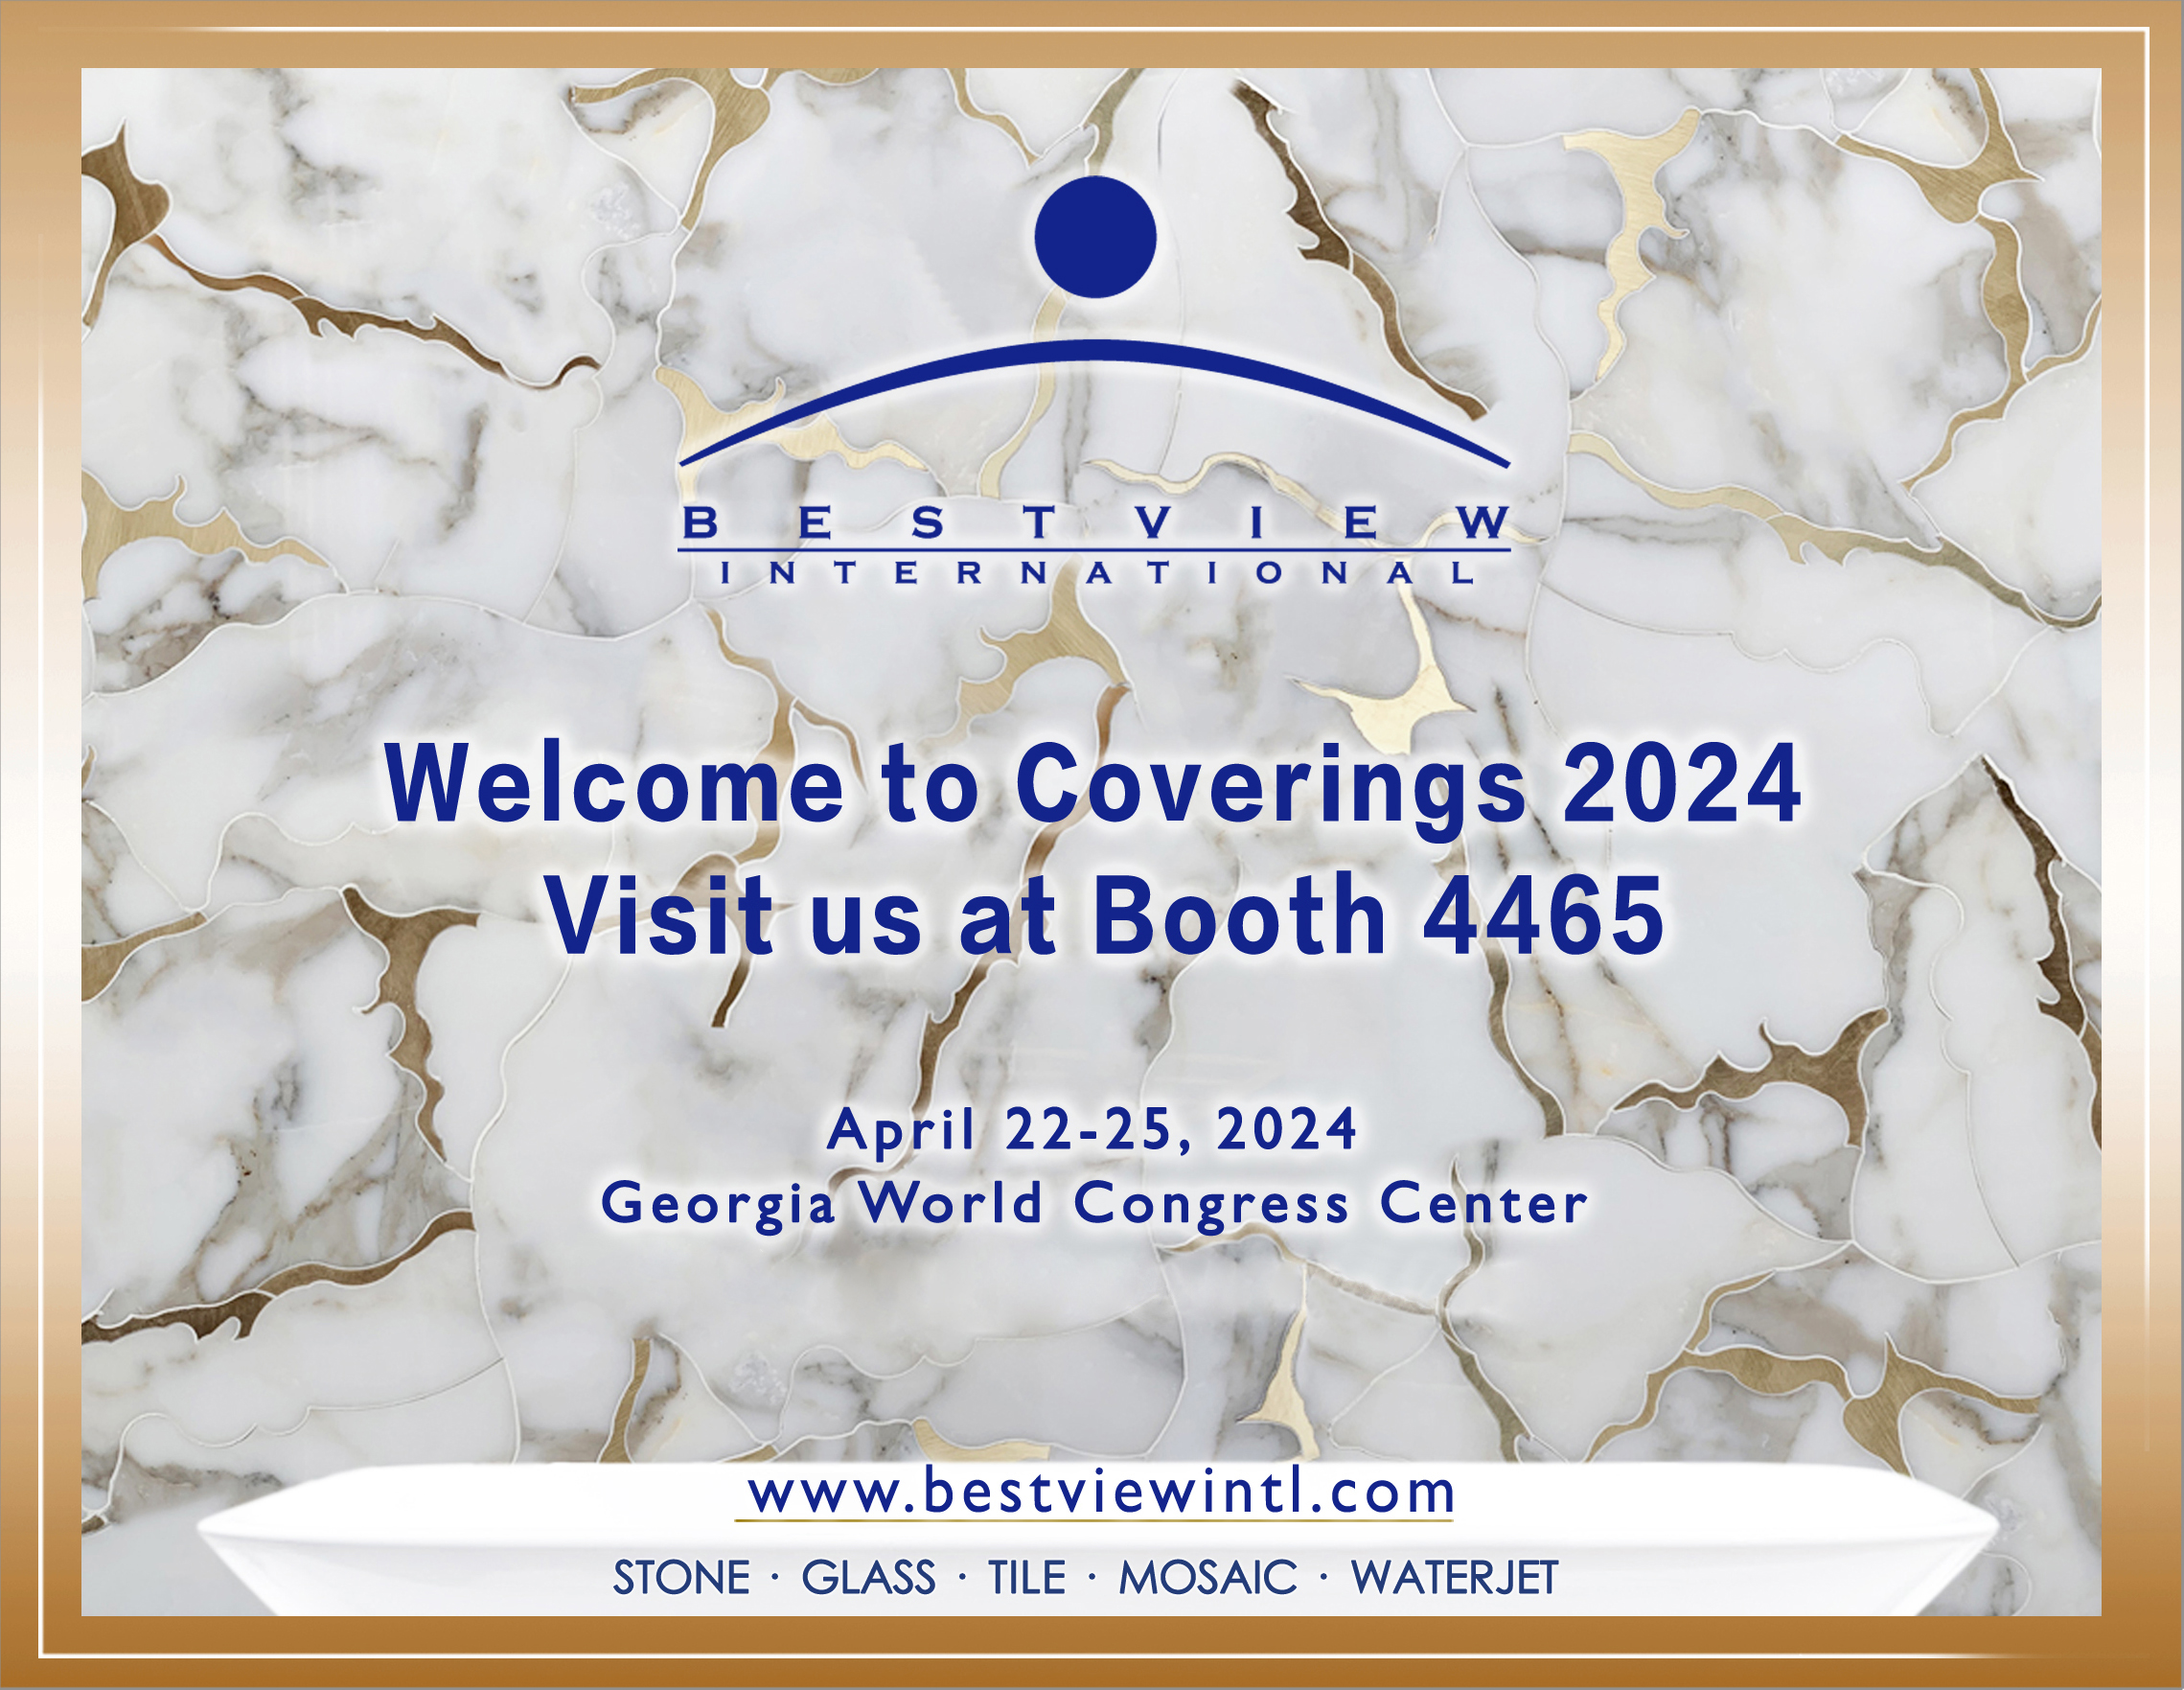 Coverings 2024 in the Georgia World Congress Center at Booth 4465